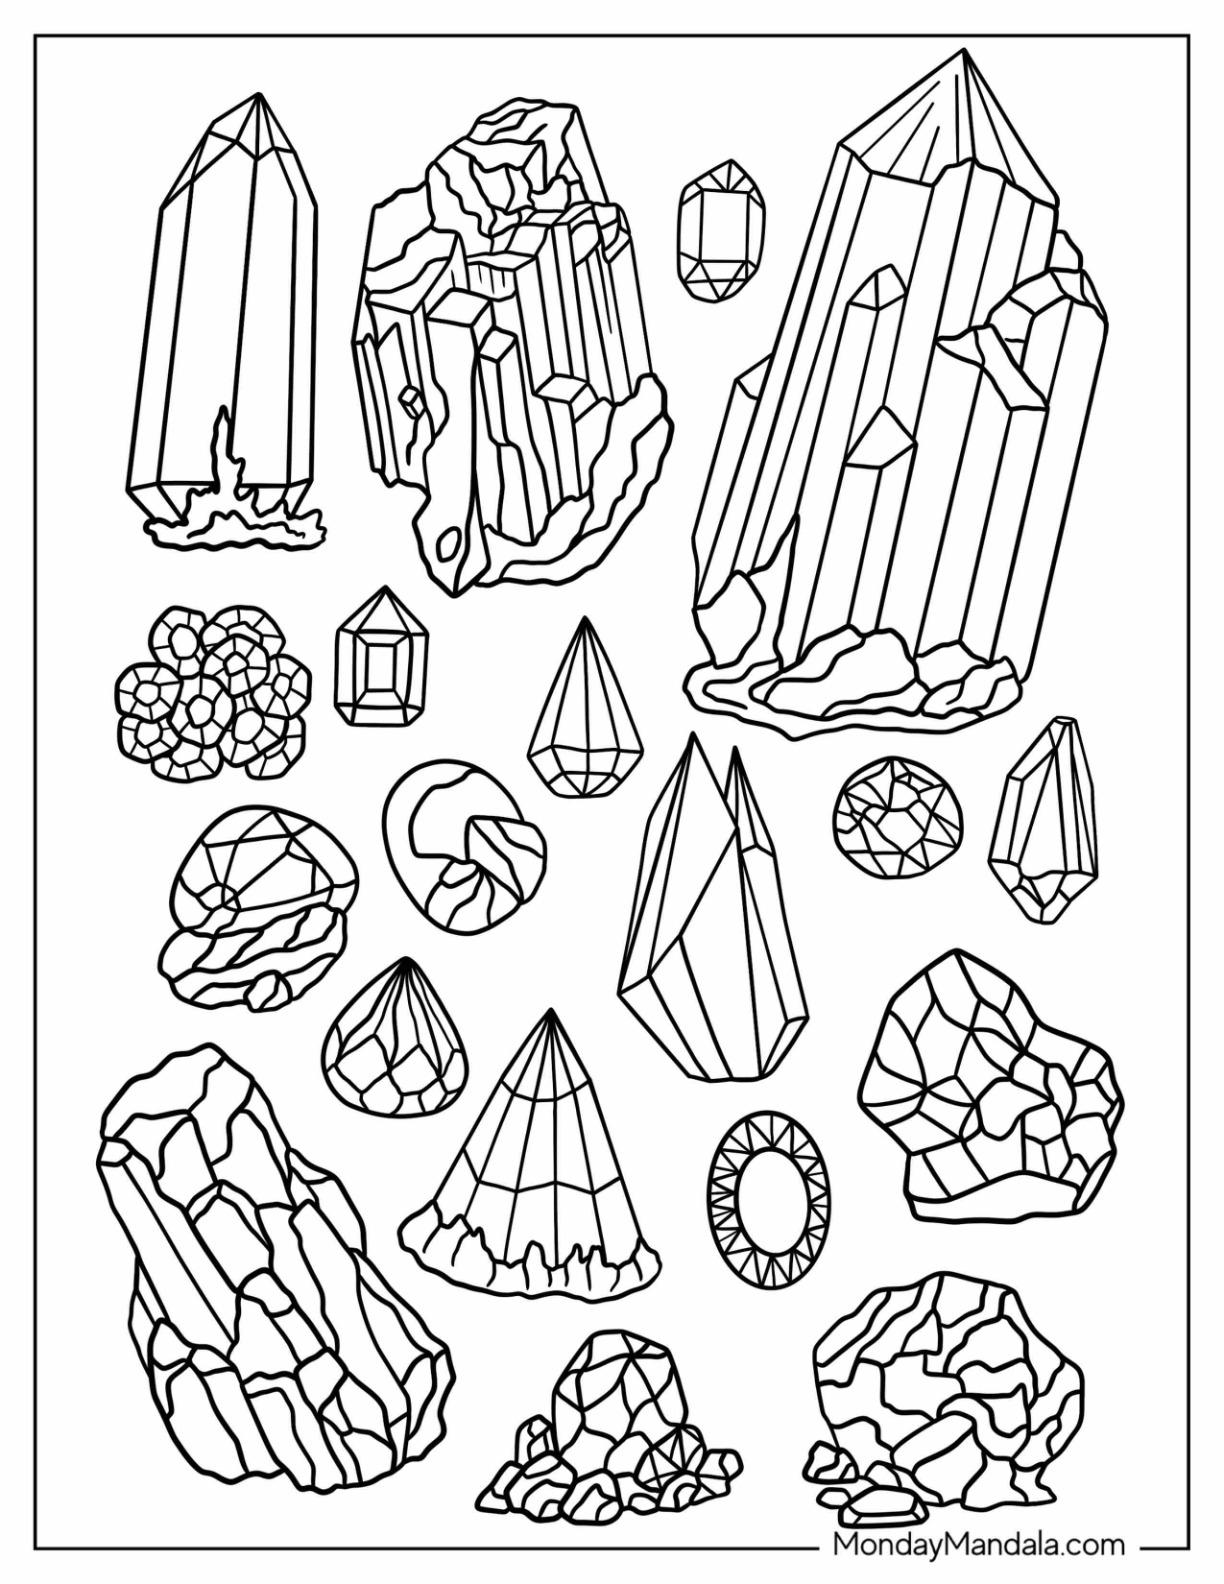 Crystal coloring pages free pdf printables dinosaur coloring pages coloring pages free coloring pages